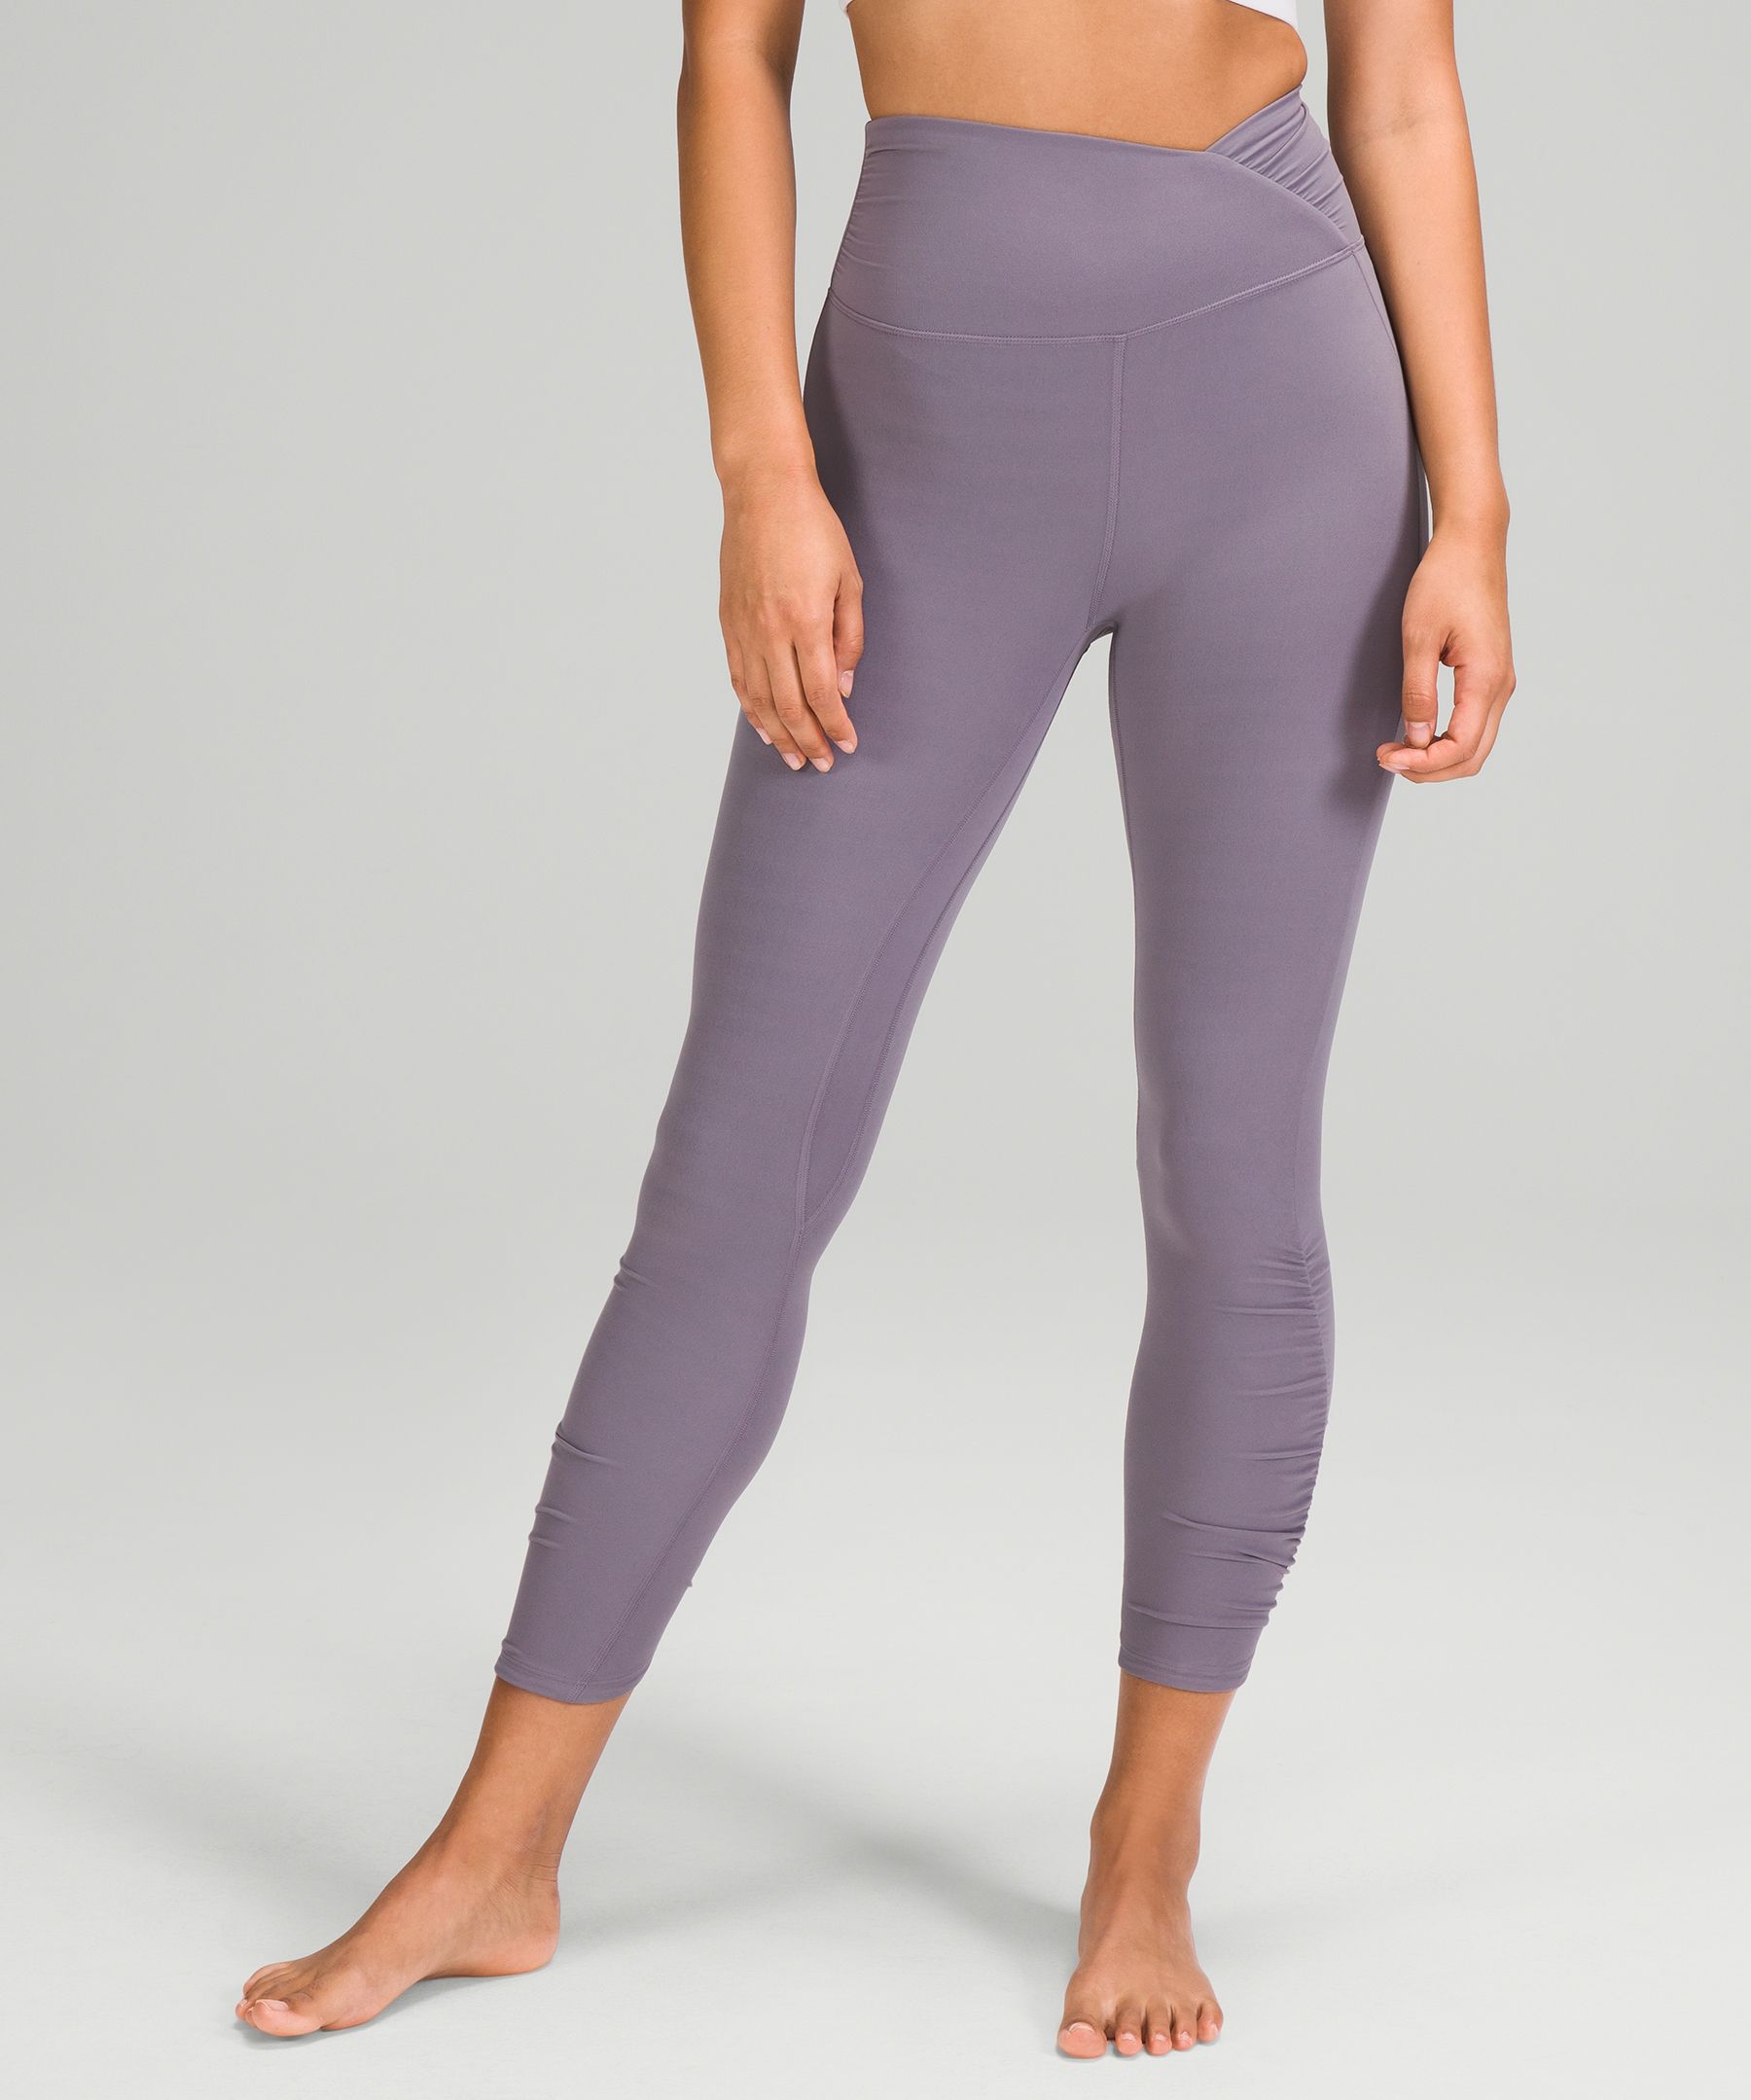 Ruched Waistband Leggings in Second SKN With Back Pocket